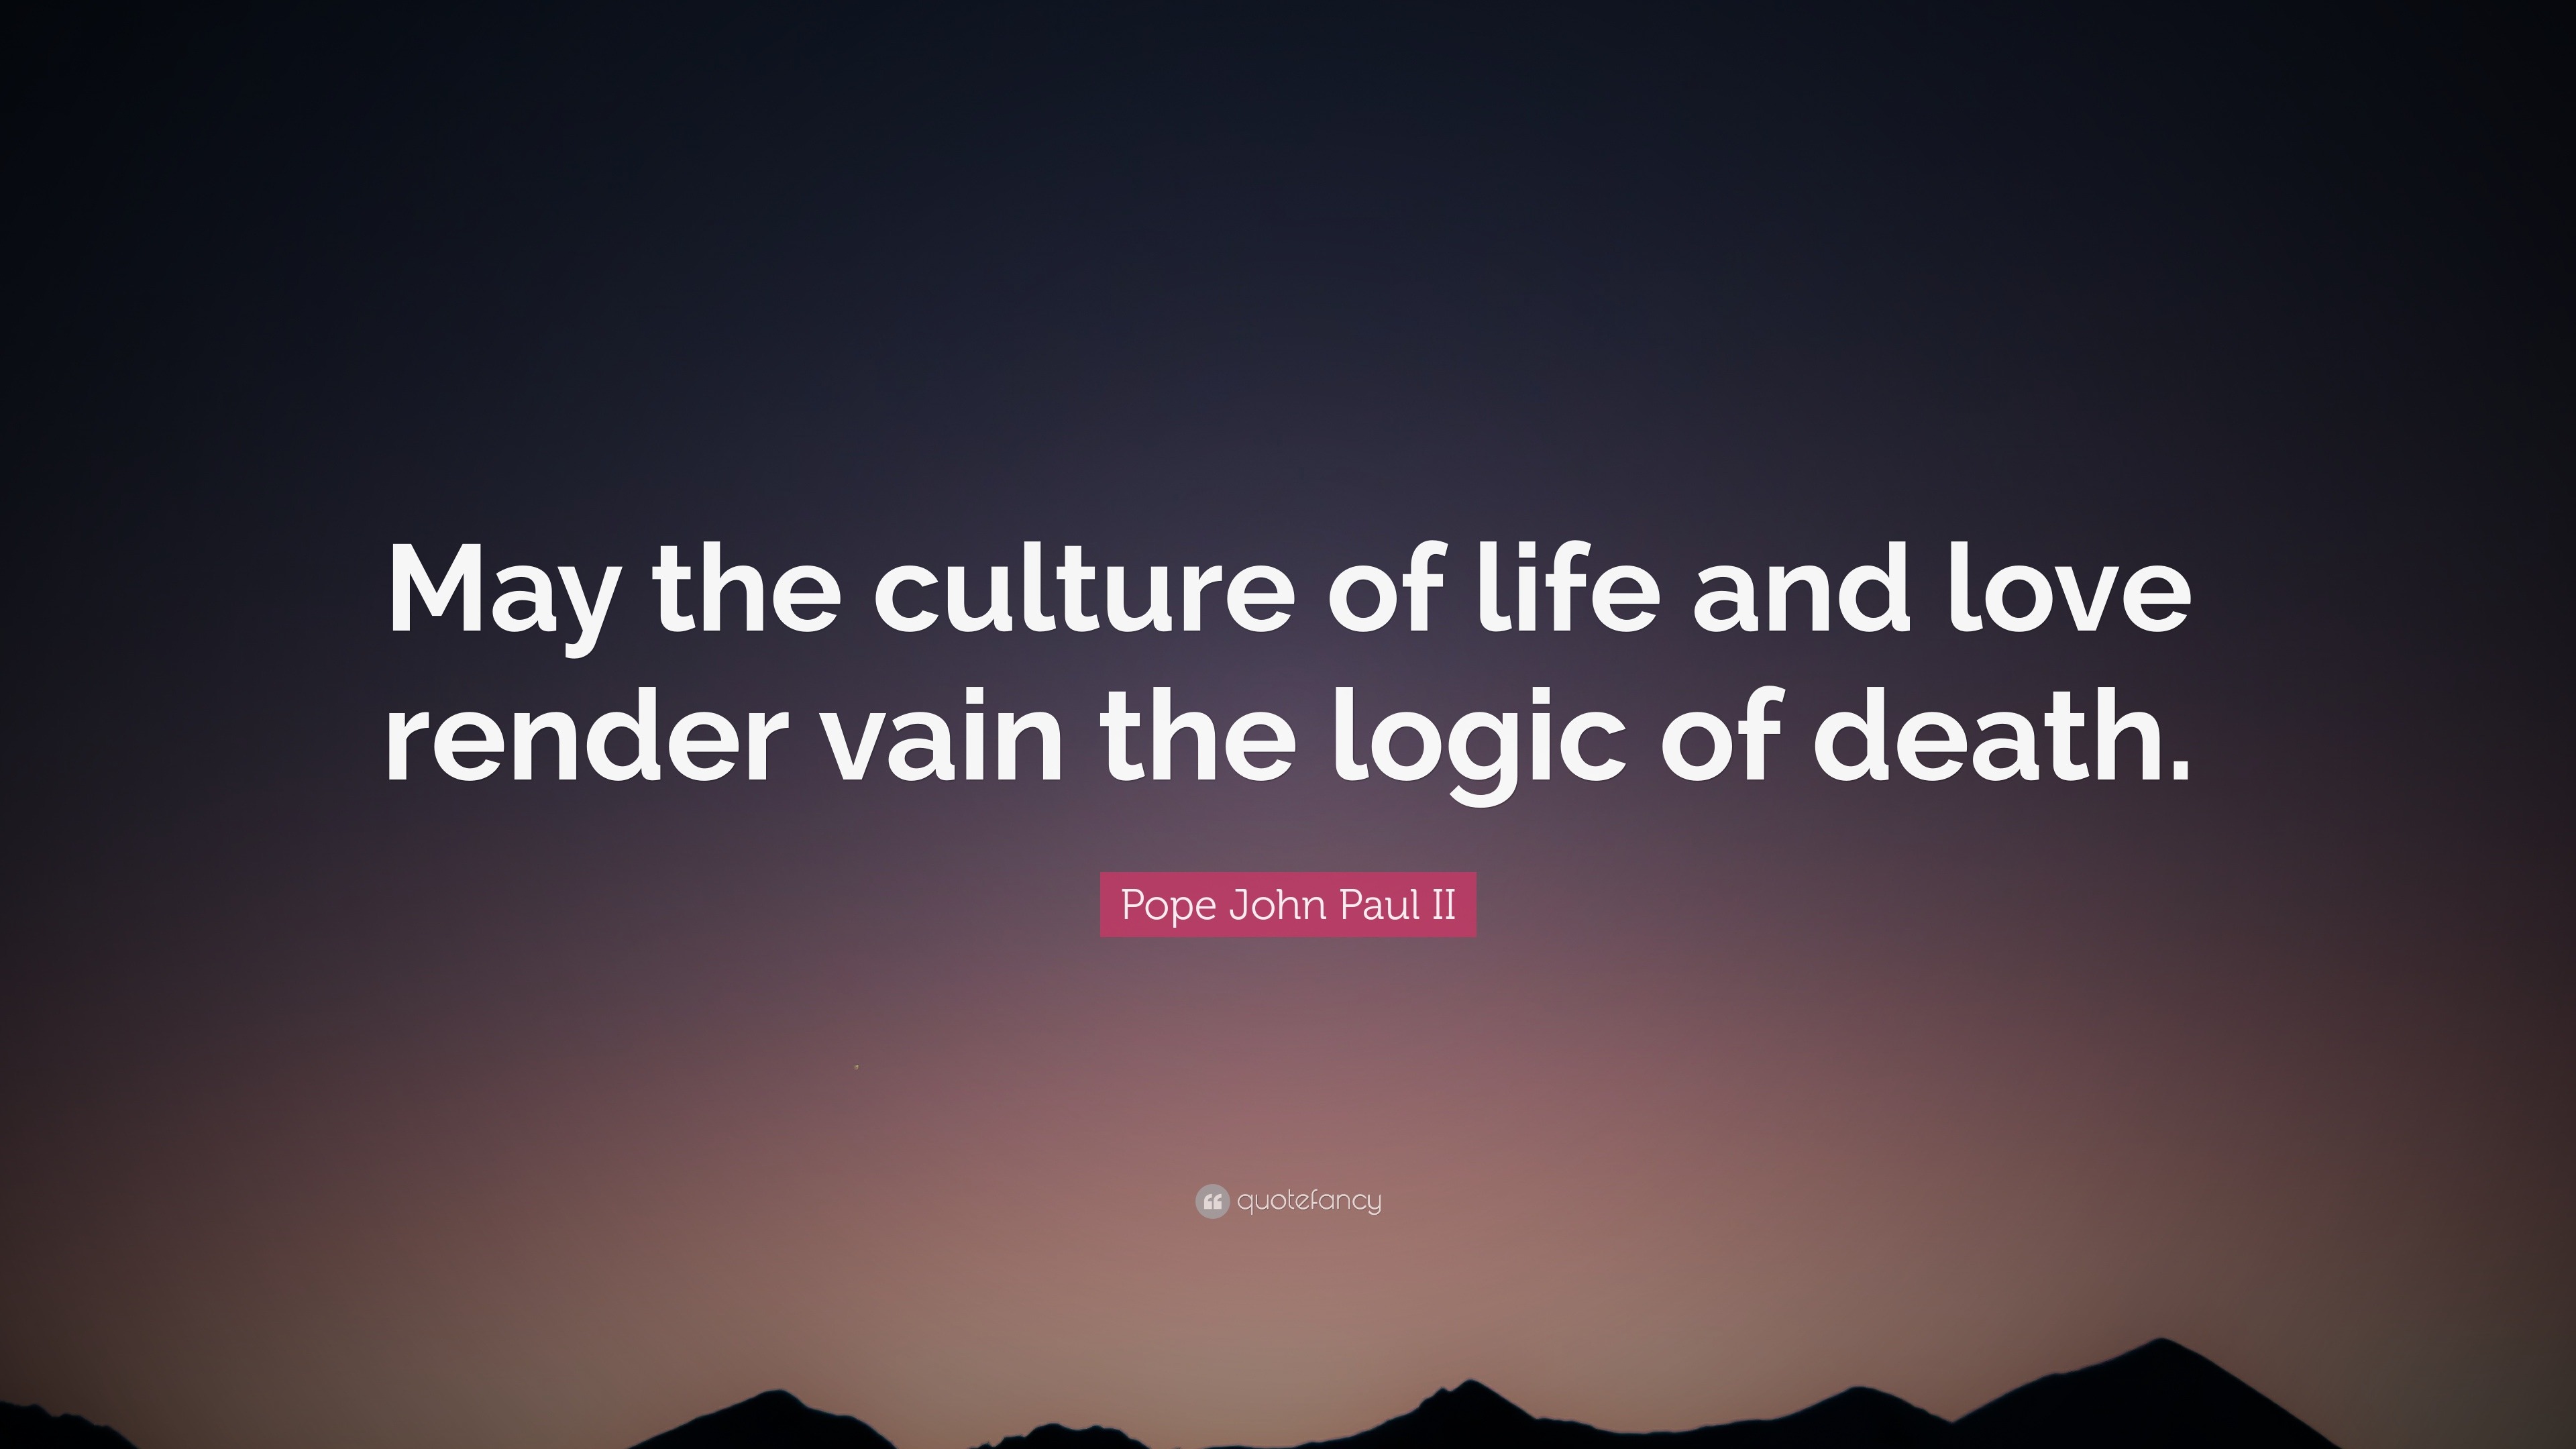 Pope John Paul II Quote “May the culture of life and love render vain